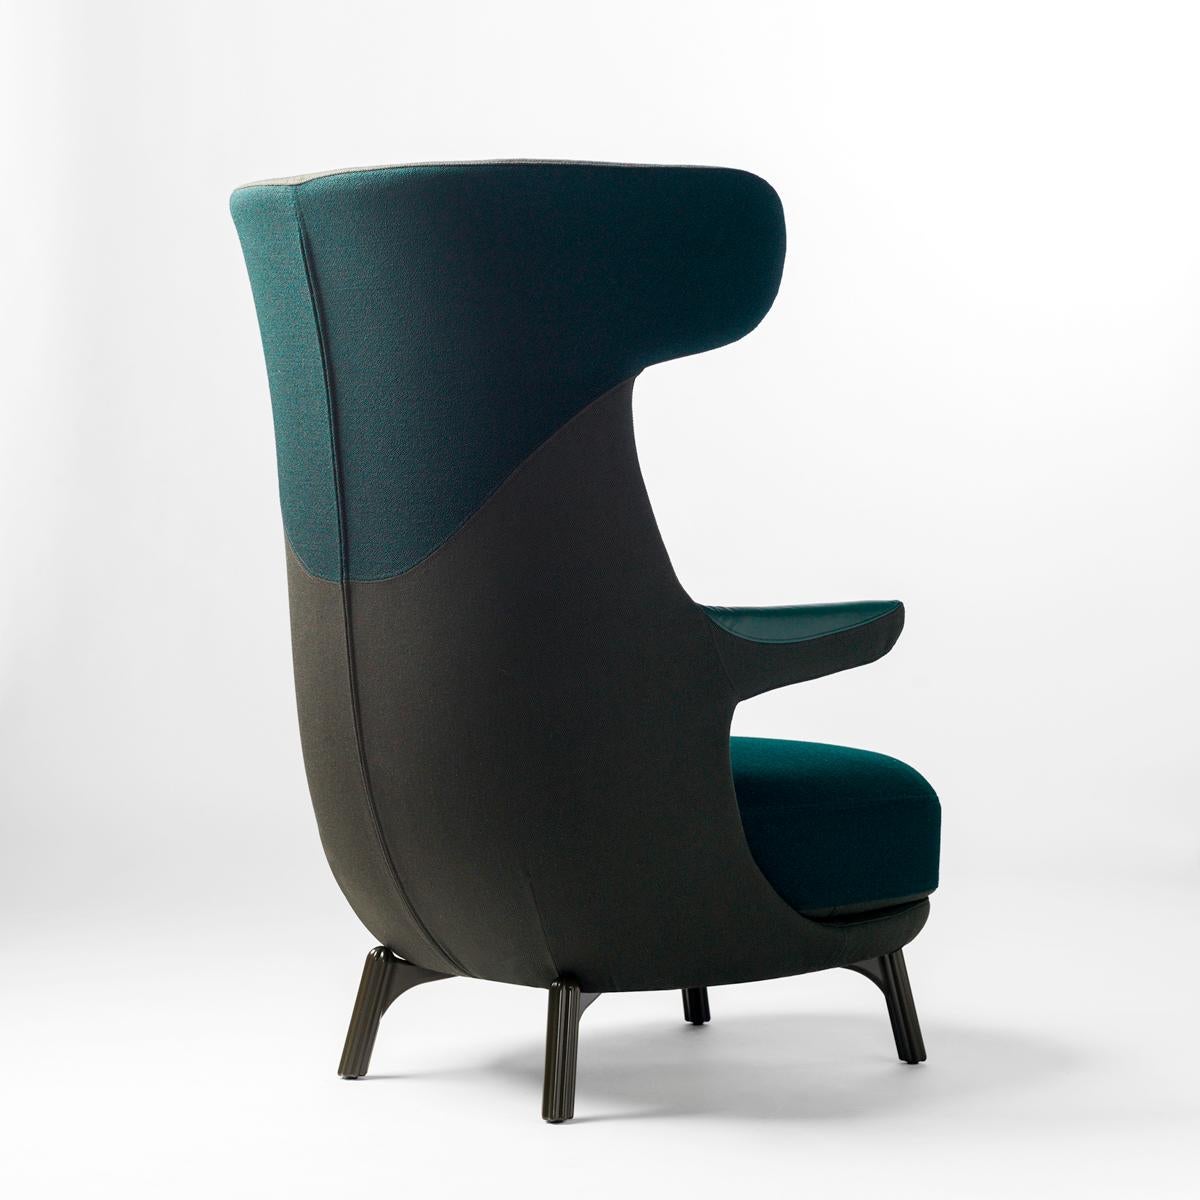 Dino armchair designed by Jaime Hayonmonufactured by BD

Main body made of rigid polyurethane covered with polyether foam cushioning. A fixed head rest, seat cushion and backrest in polyether foam cushioning. Cushion covers are removable. 

Cast